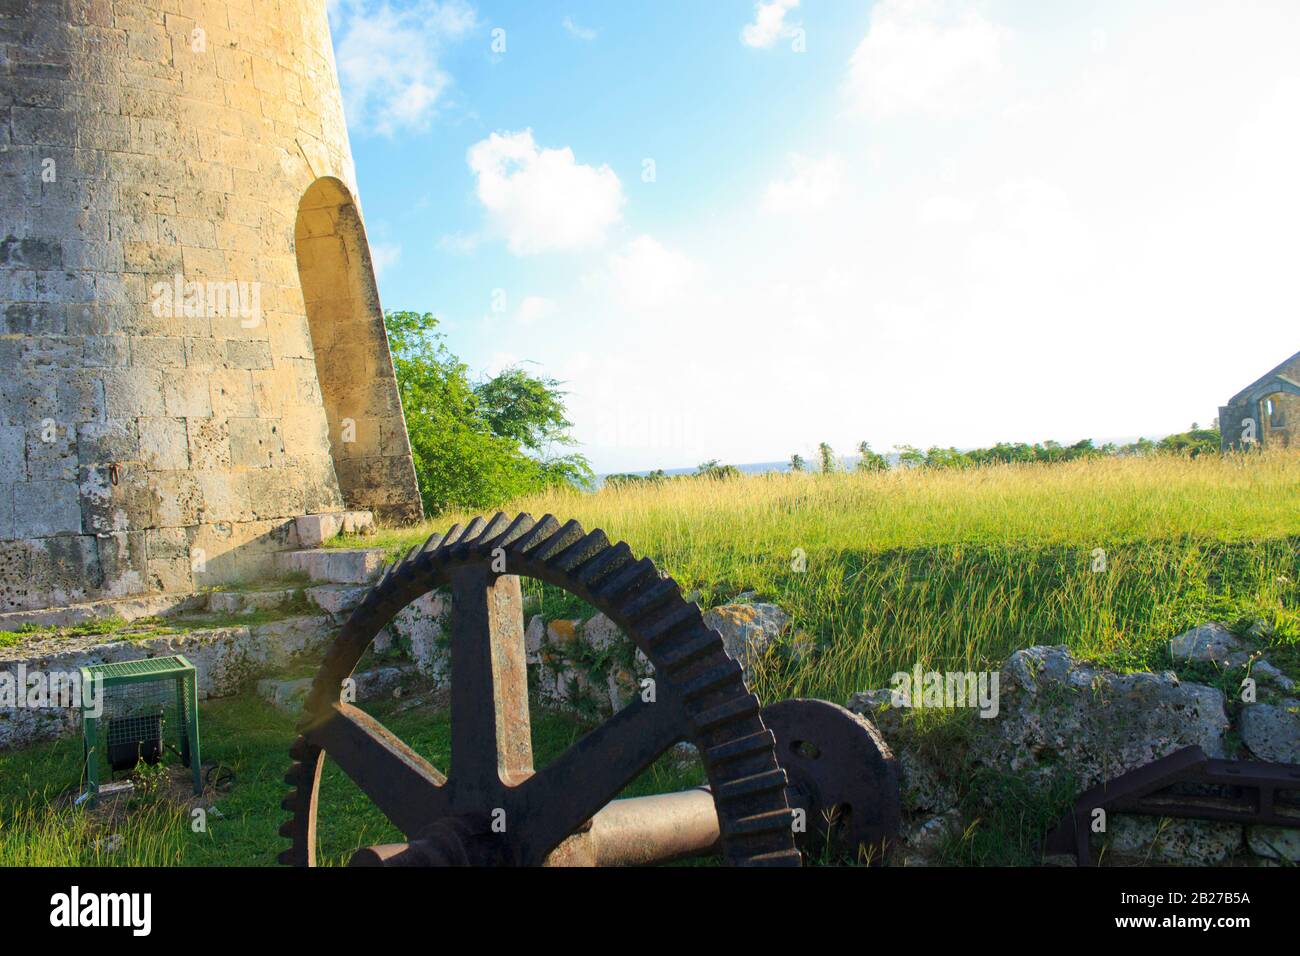 Breath-taking view of the ruin of an old mill and a mechanical part on a grassy ground with rocks at the golden hour with a bright blue sky Stock Photo